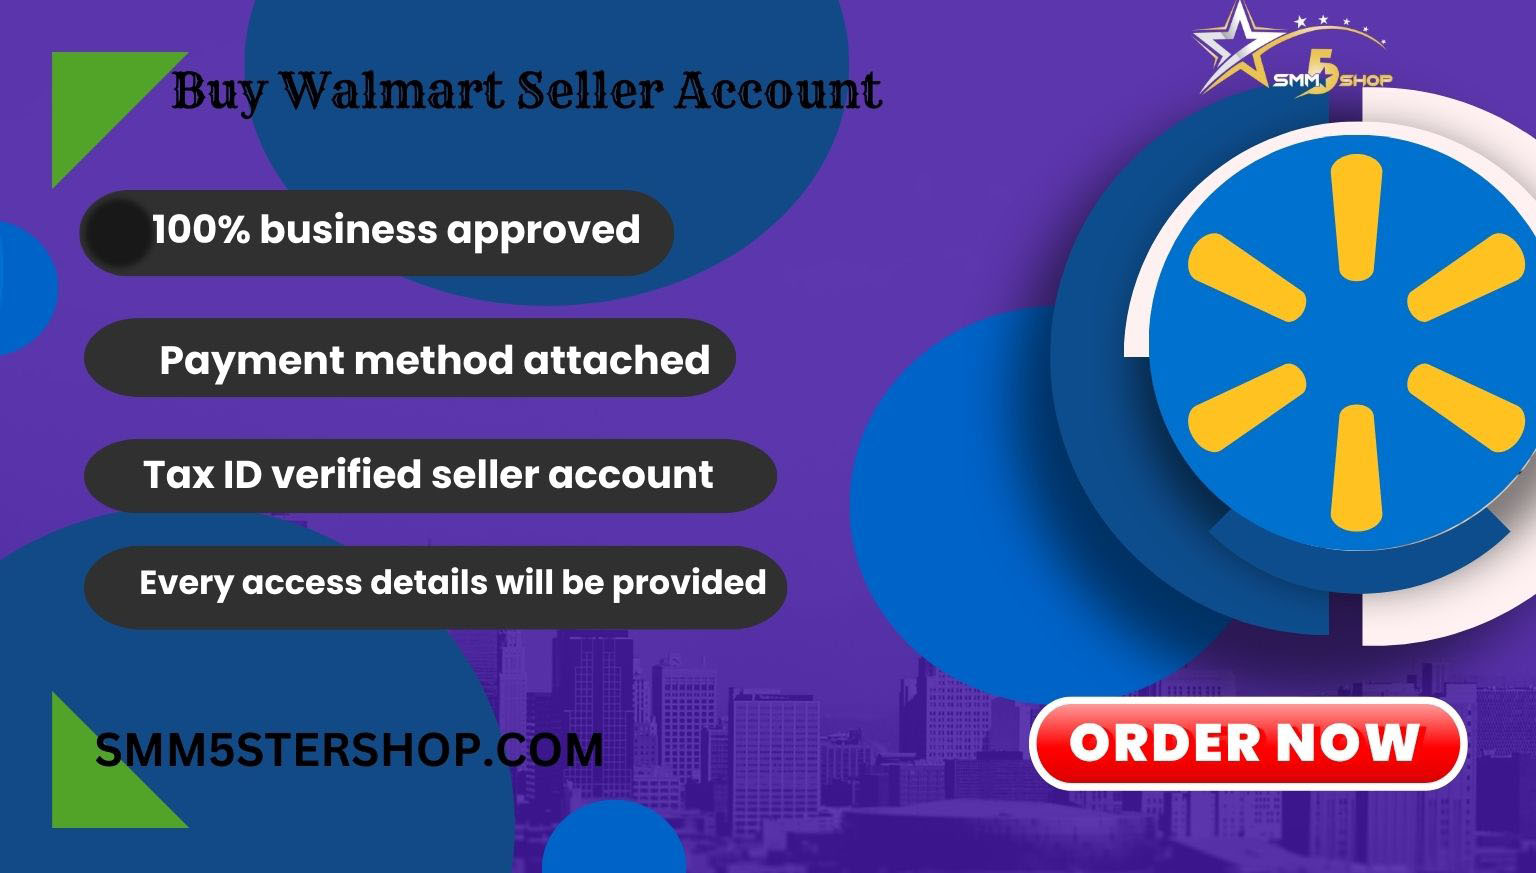 Buy Walmart seller account at smm5starshop.com. We provide email, number, passport, EIN, Tax ID, LLC (certificate for incorporation) approved accounts at cheap price.